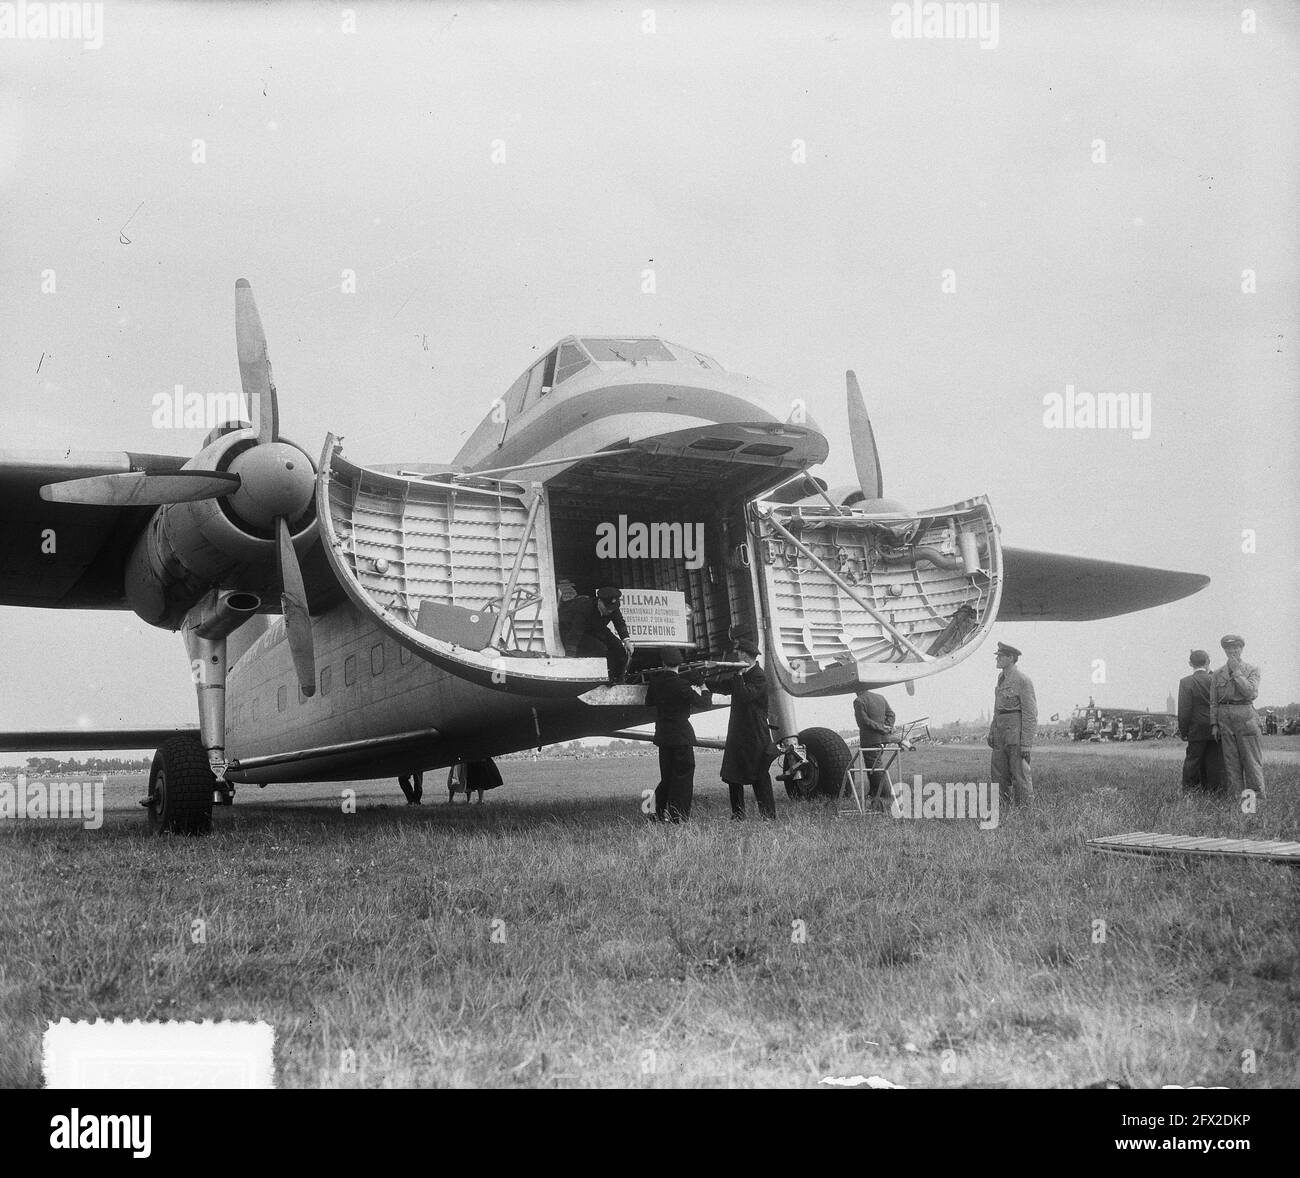 https://c8.alamy.com/comp/2FX2DKP/air-show-cargo-plane-with-autos-august-2-1952-autos-air-shows-the-netherlands-20th-century-press-agency-photo-news-to-remember-documentary-historic-photography-1945-1990-visual-stories-human-history-of-the-twentieth-century-capturing-moments-in-time-2FX2DKP.jpg